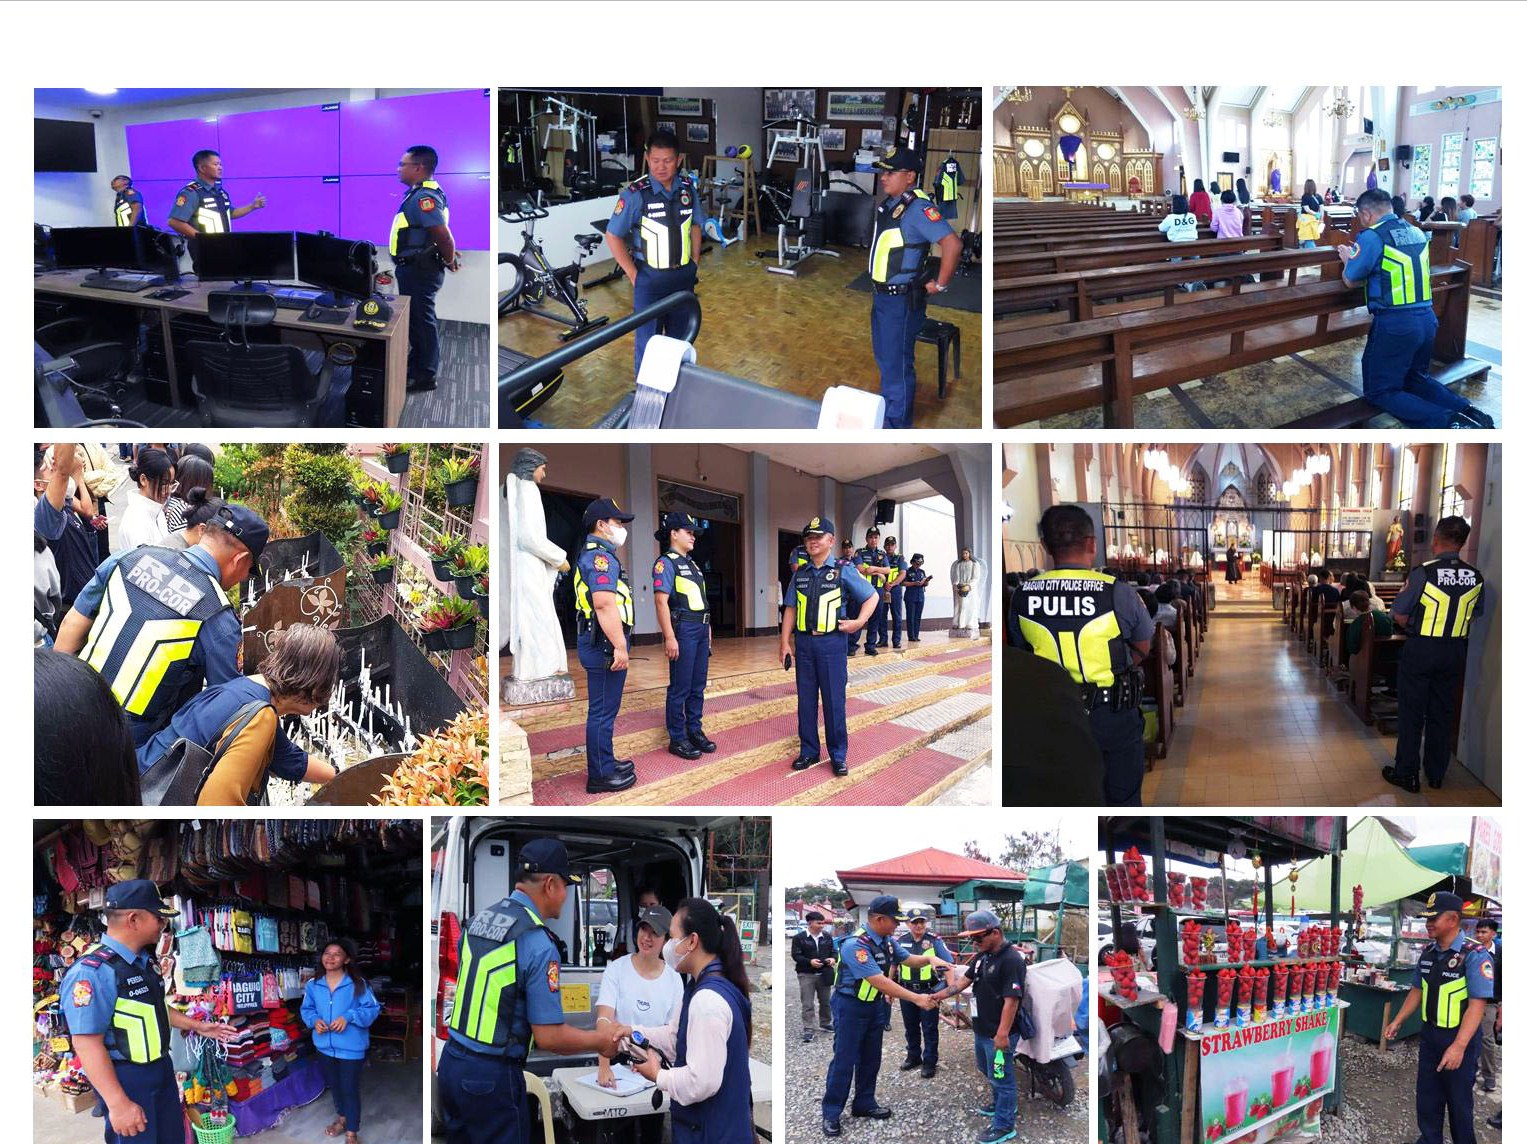 RD PBGEN PEREDO JR. led the ocular inspection and participated in the practice of Visita Iglesia